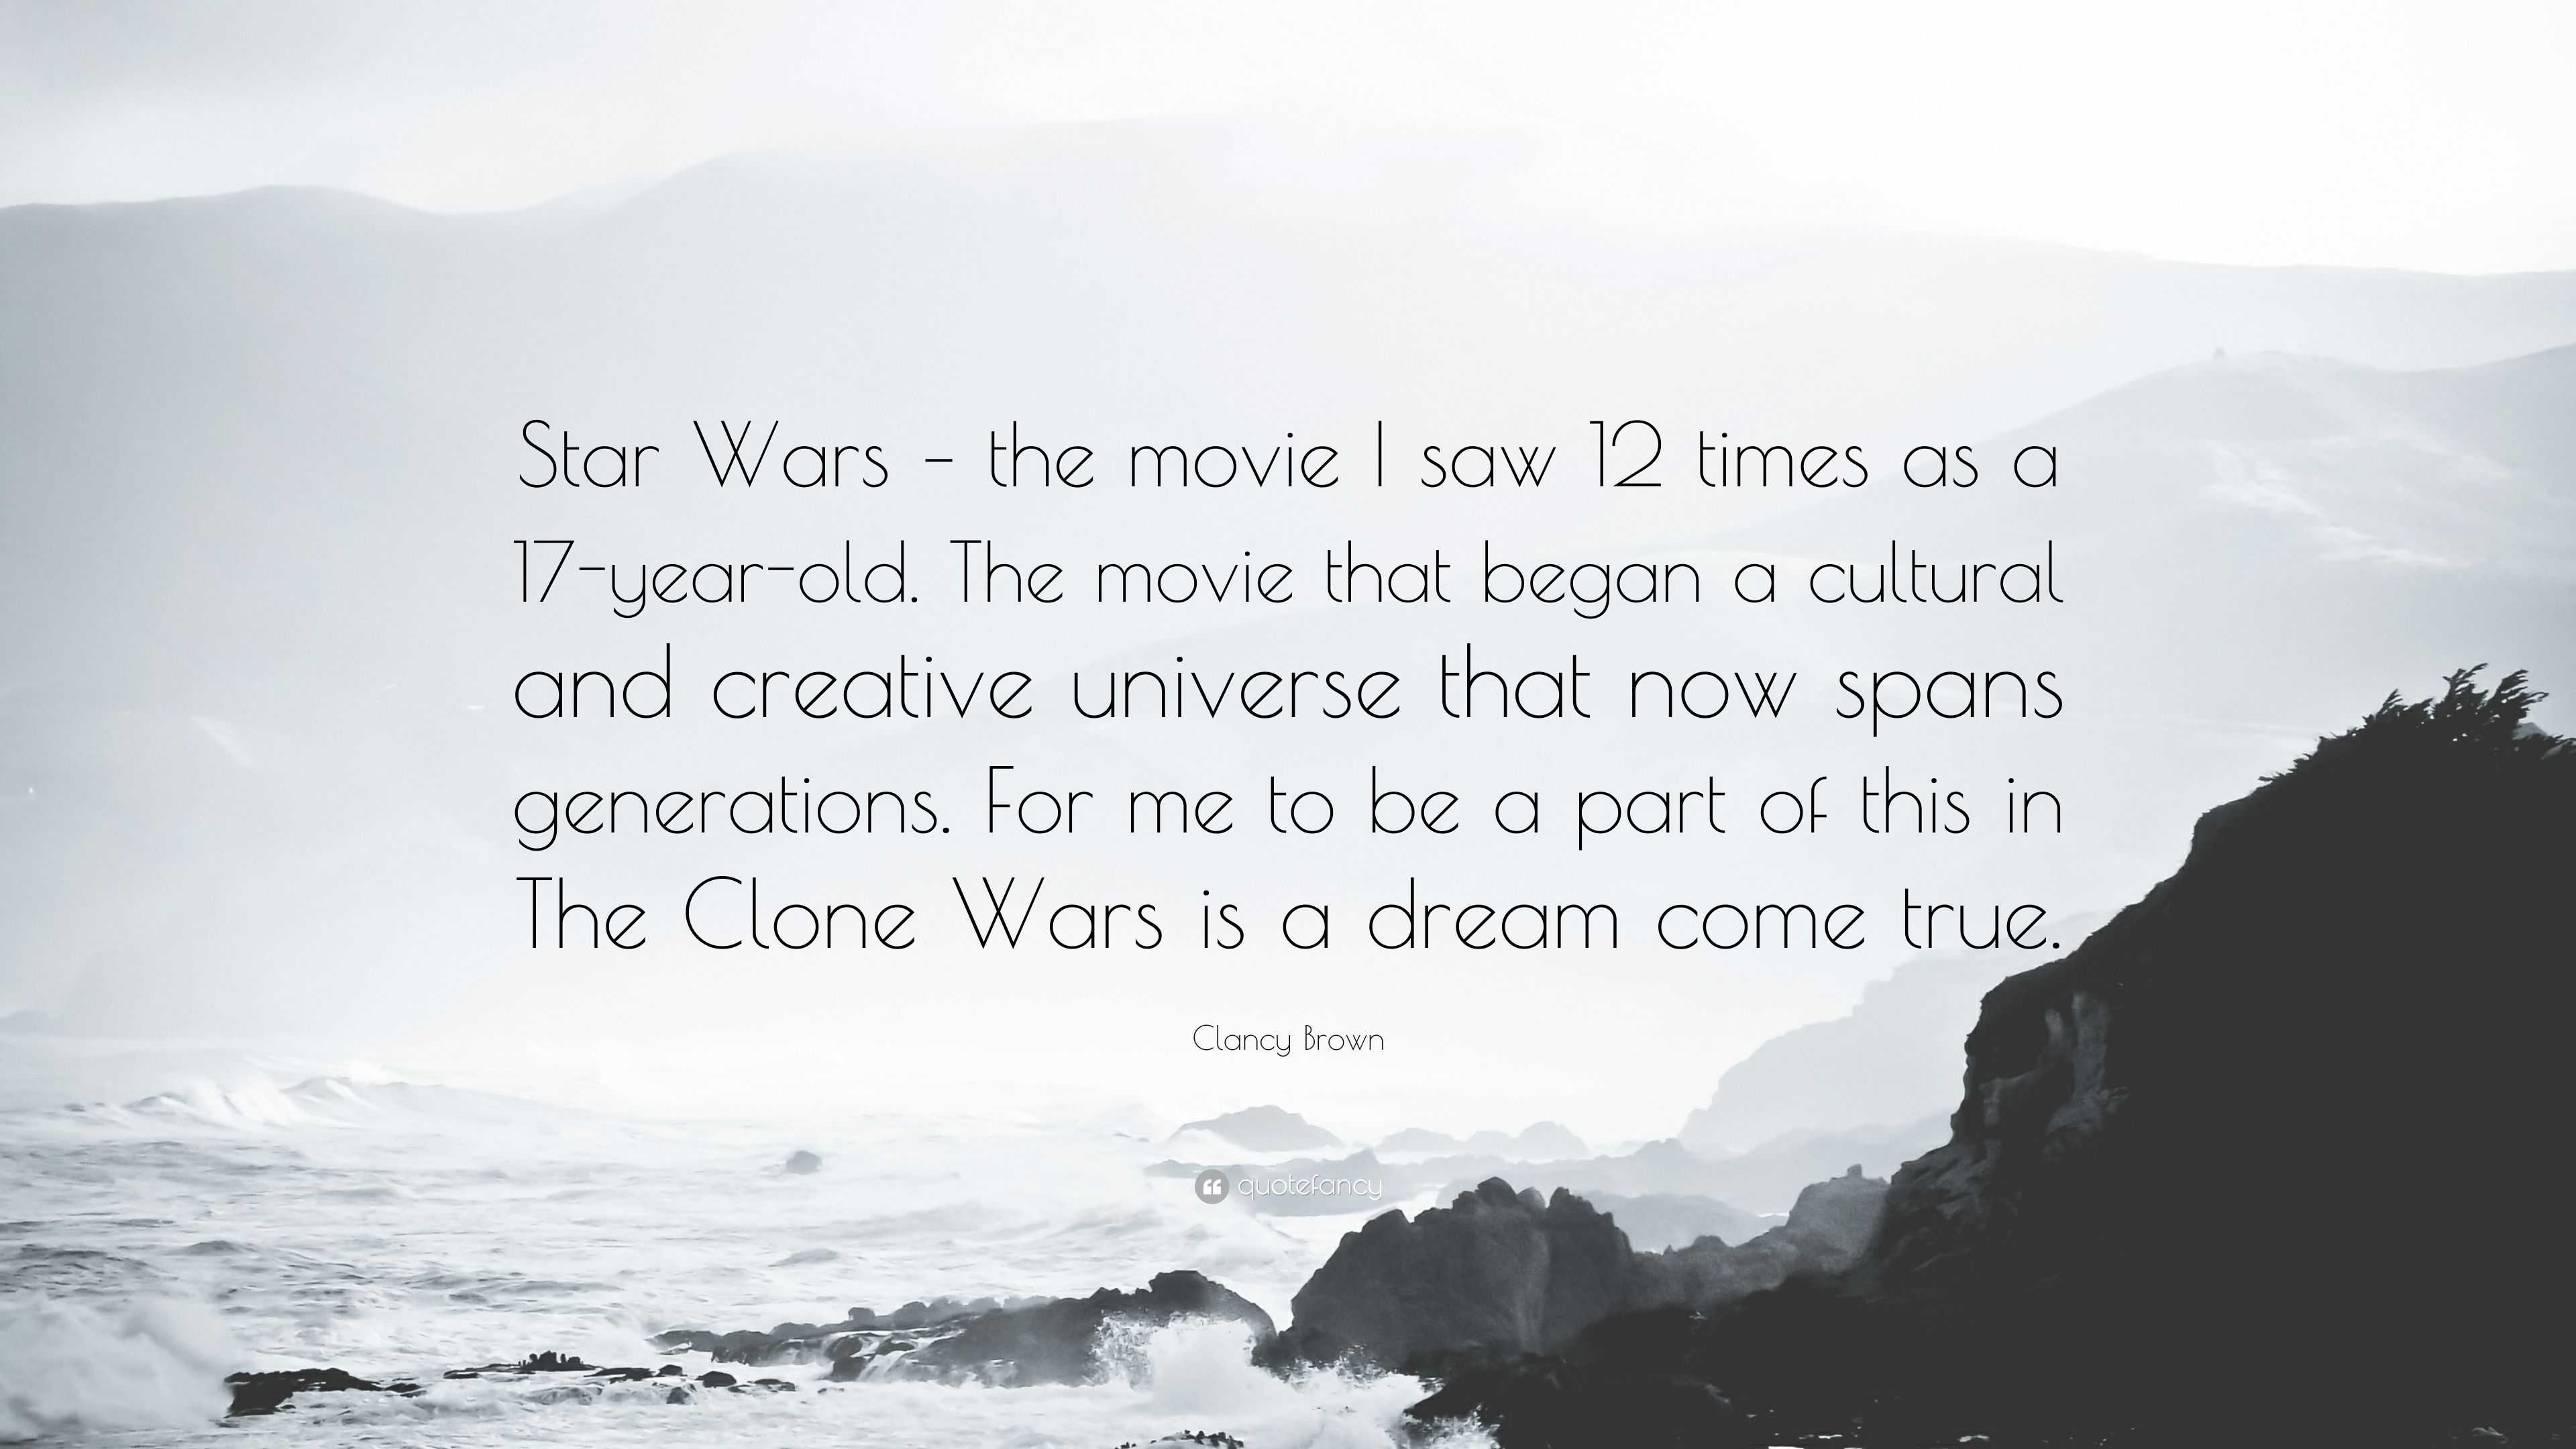 Clancy Brown Quote: “Star Wars – the movie I saw 12 times as a 17-year-old.  The movie that began a cultural and creative universe that now sp...”